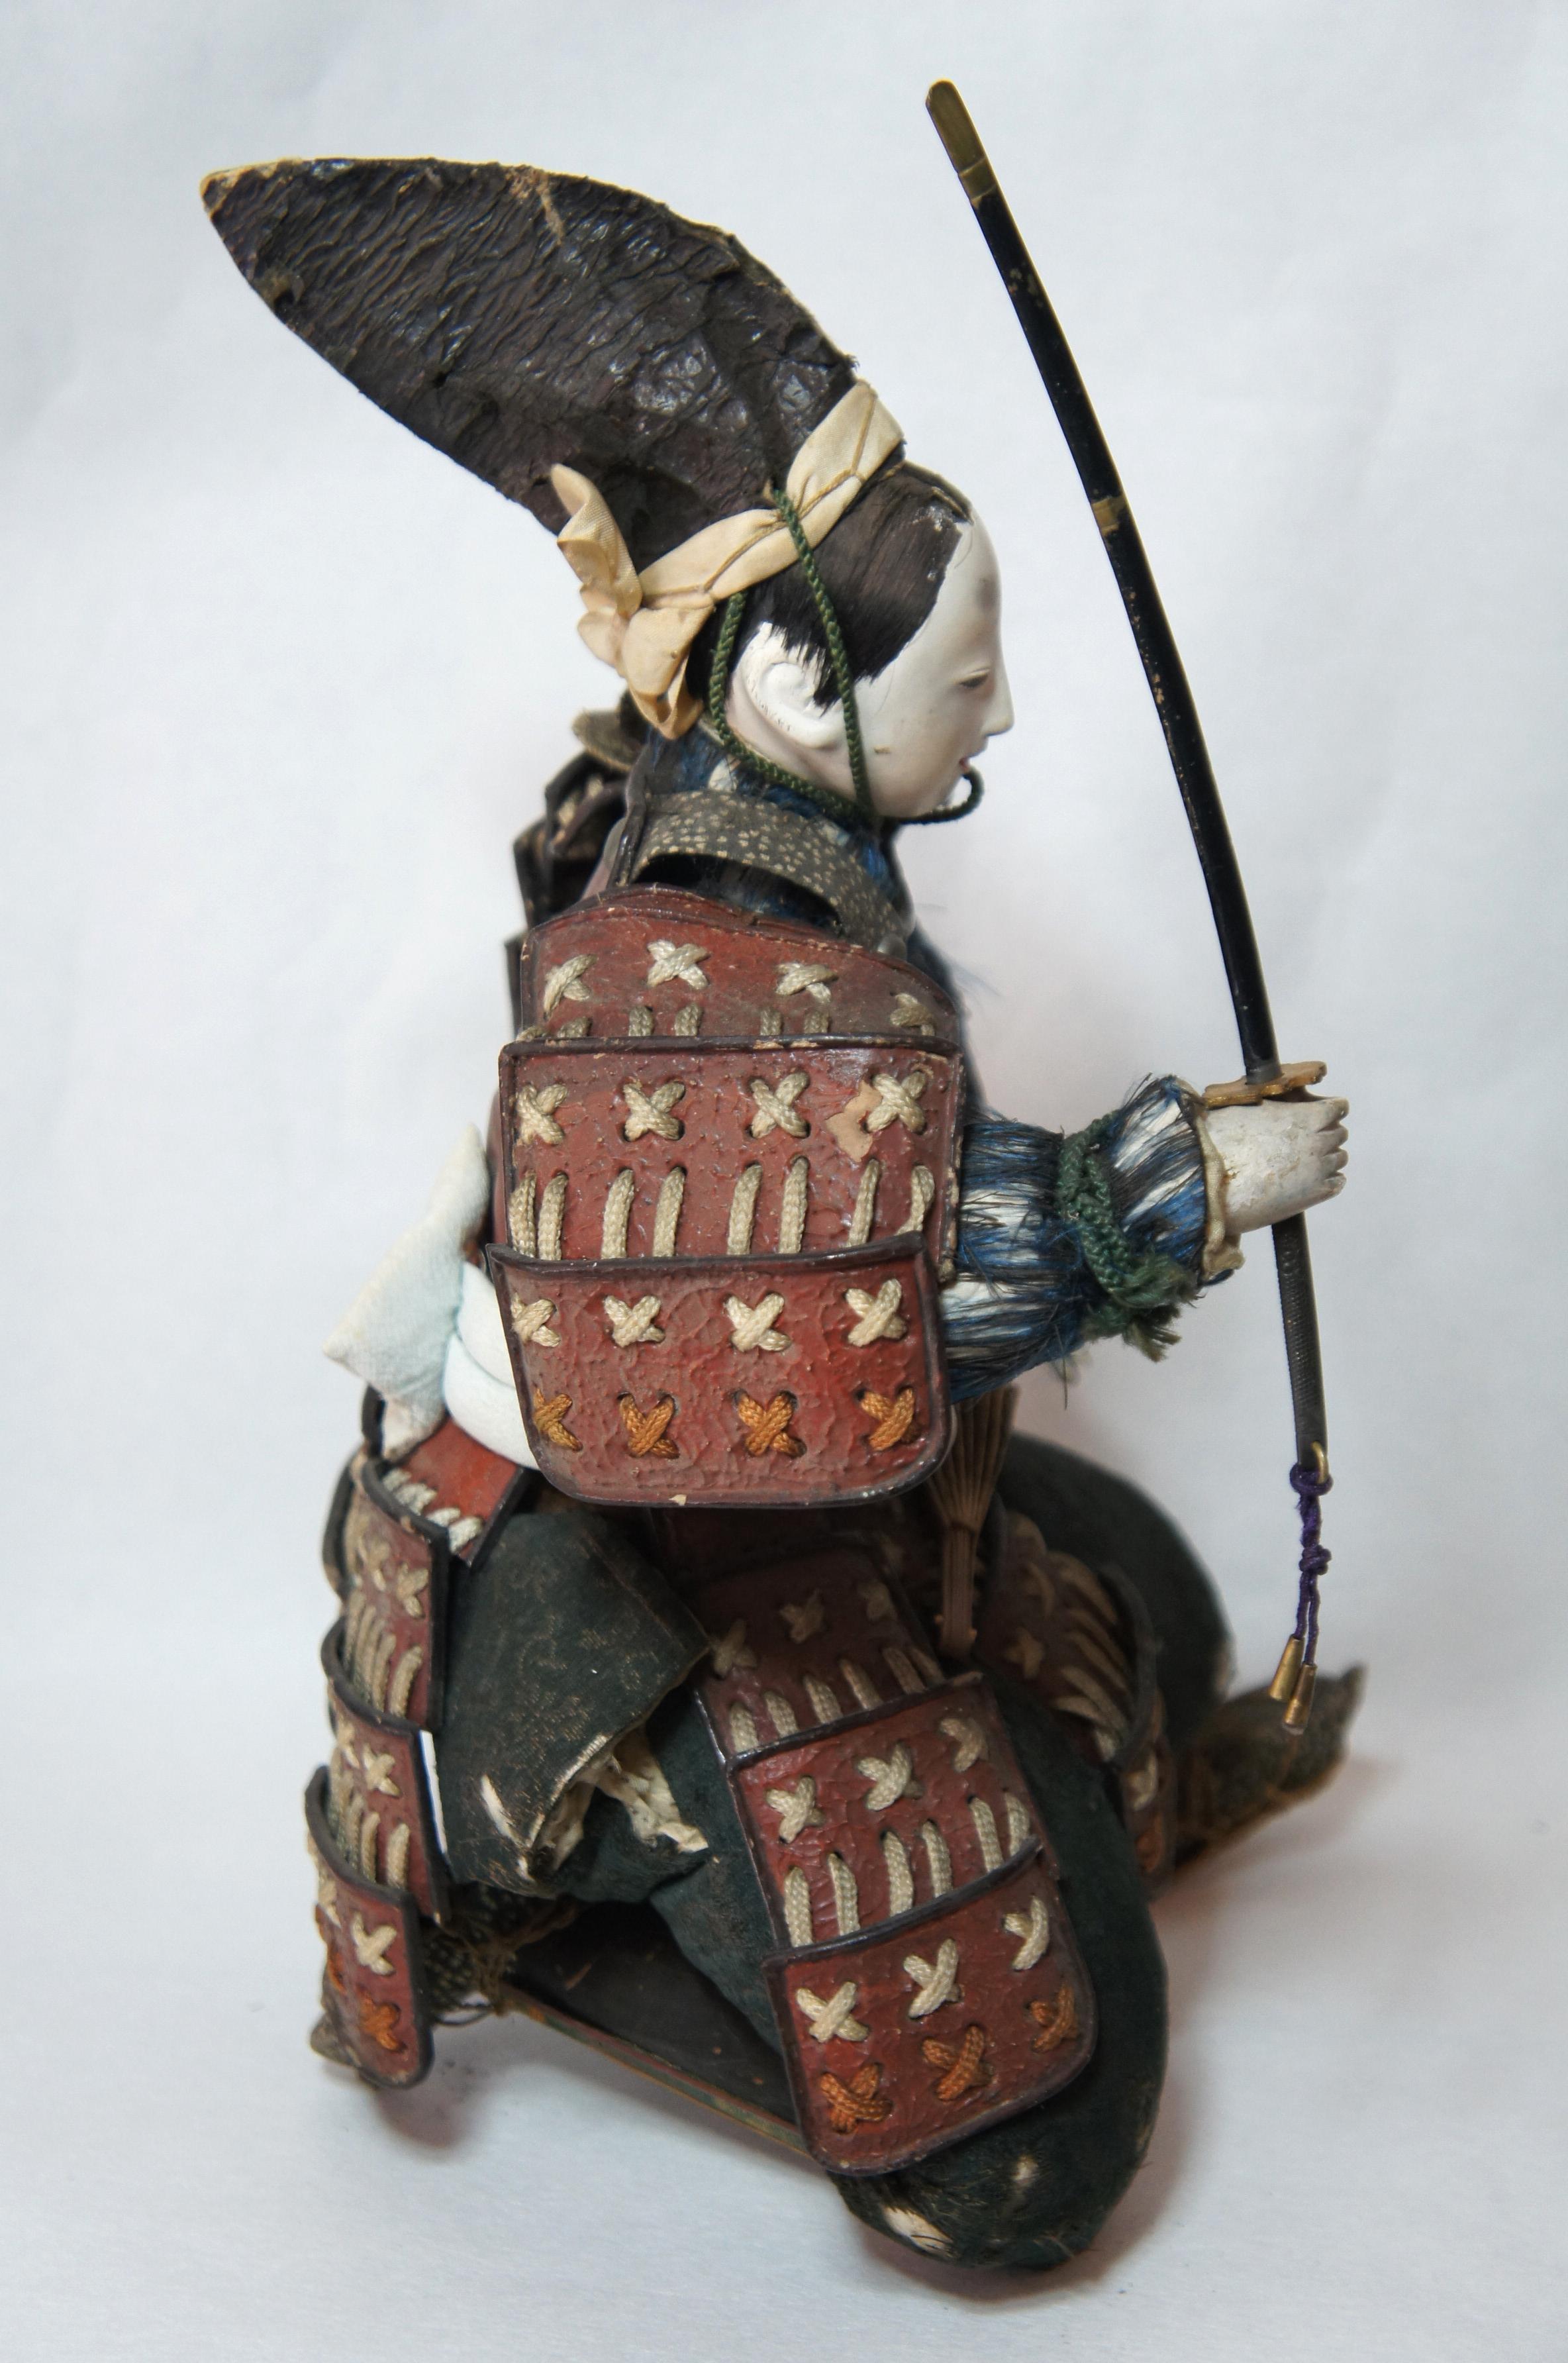 Antique Samurai doll that was made in the Edo period by skilled craftsman.

The Edo period means for 260 years from the time Ieyasu Tokugawa started Shogunate in Edo (Tokyo) in 1603, to the Restoration of imperial Rule by Yoshinobu Tokugawa, the